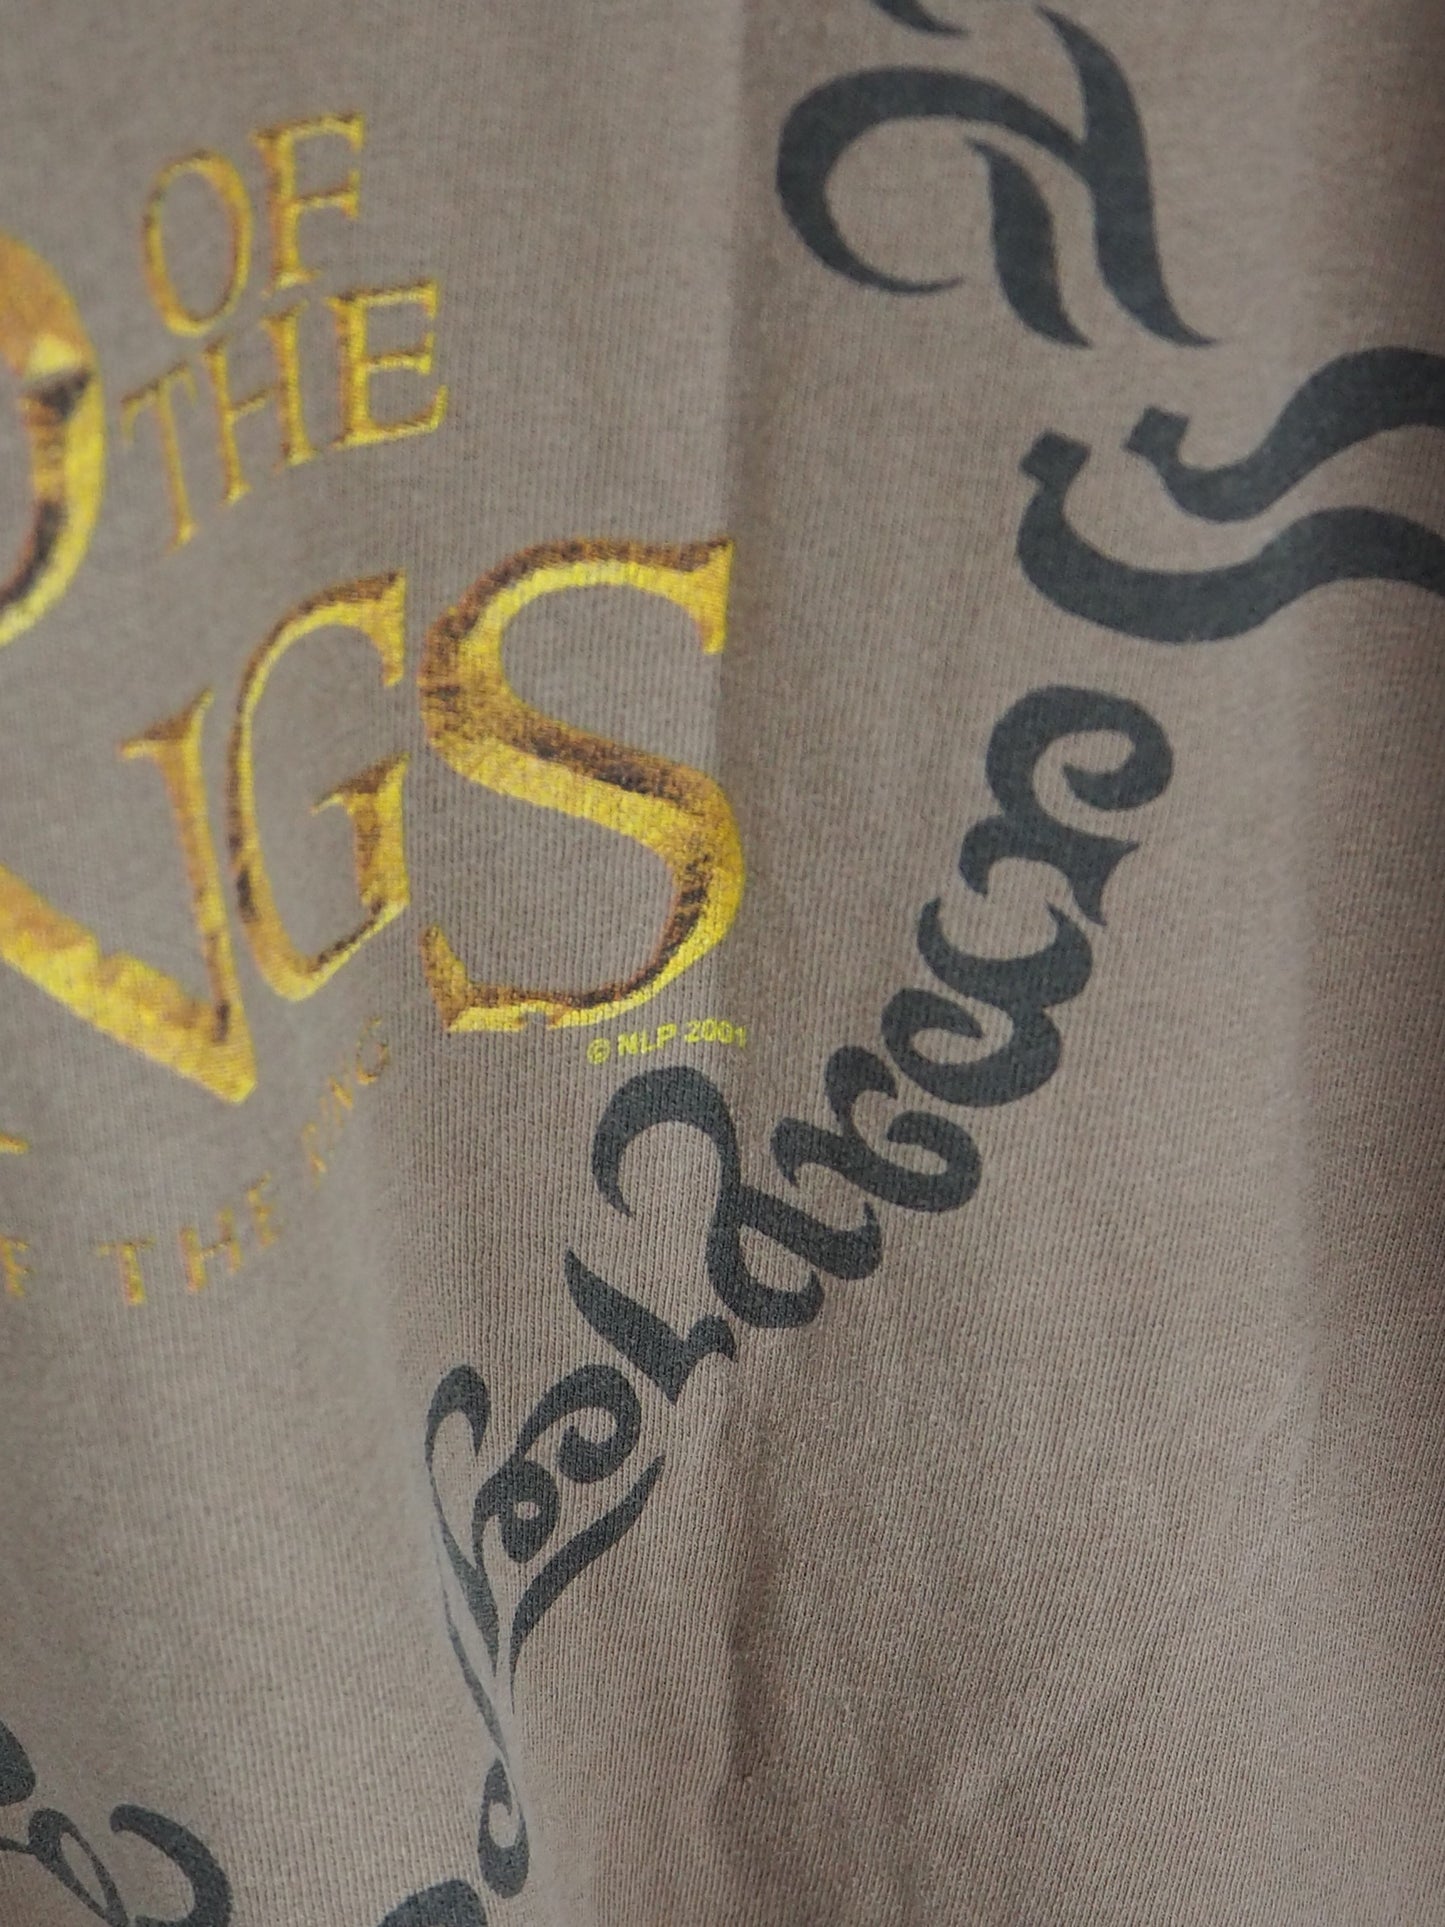 Vintage Lord of the Rings t-shirt - size XL